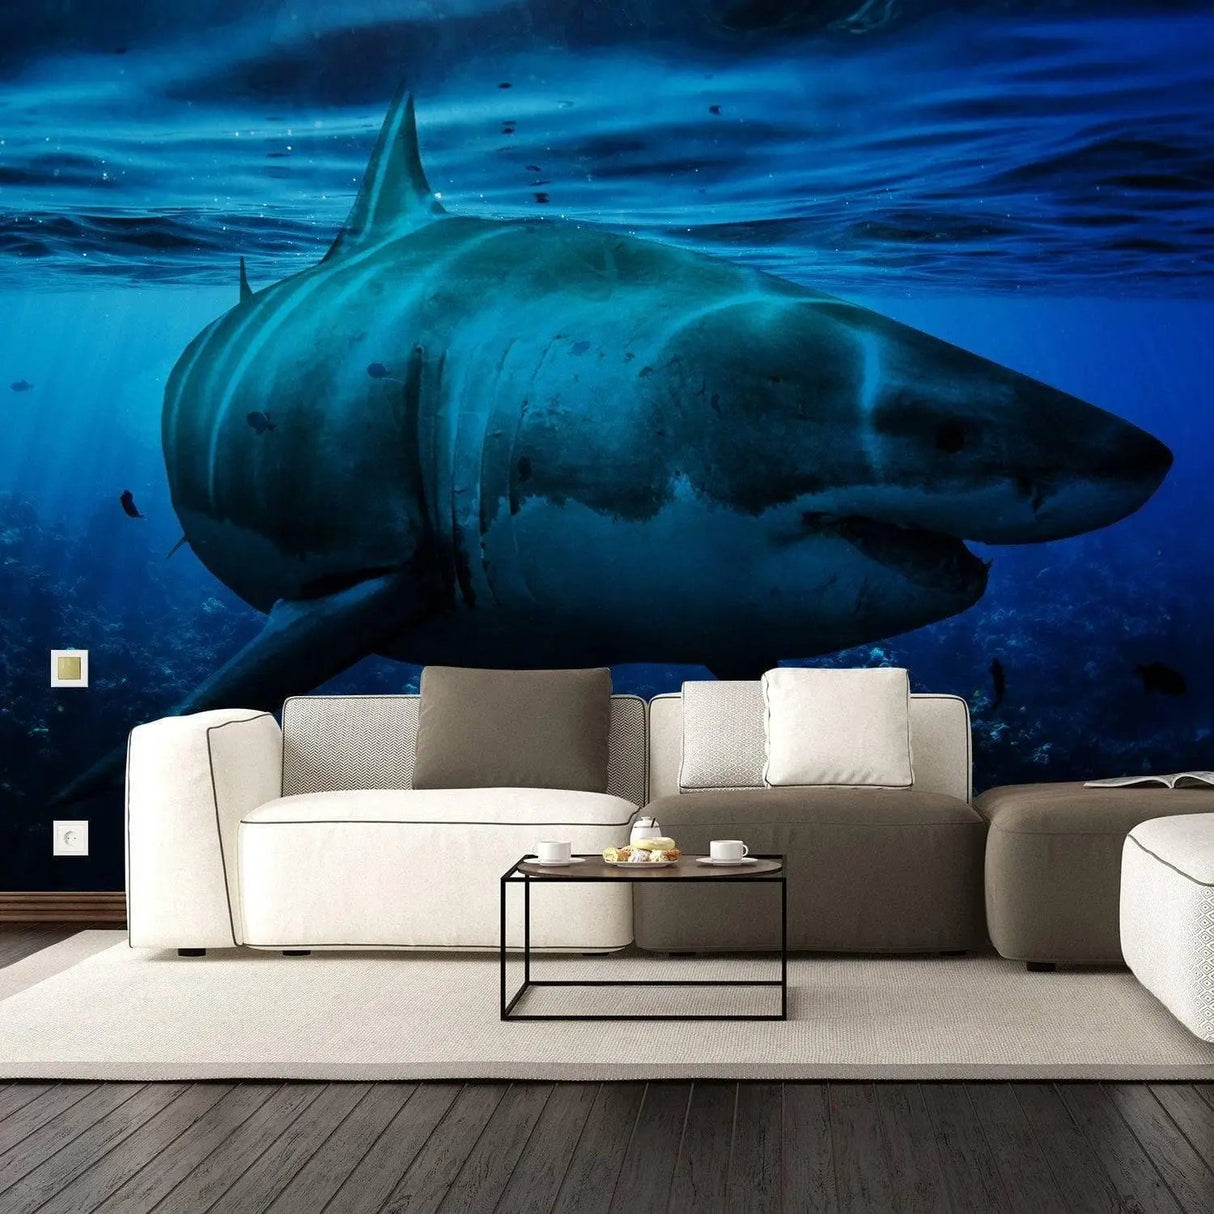 Ocean Shark Wallpaper Art Decal - Underwater 3d Decor Wall Paper Removable Sticker - Large Blue Water Photo Sea Boy Room Covering Mural - Decords